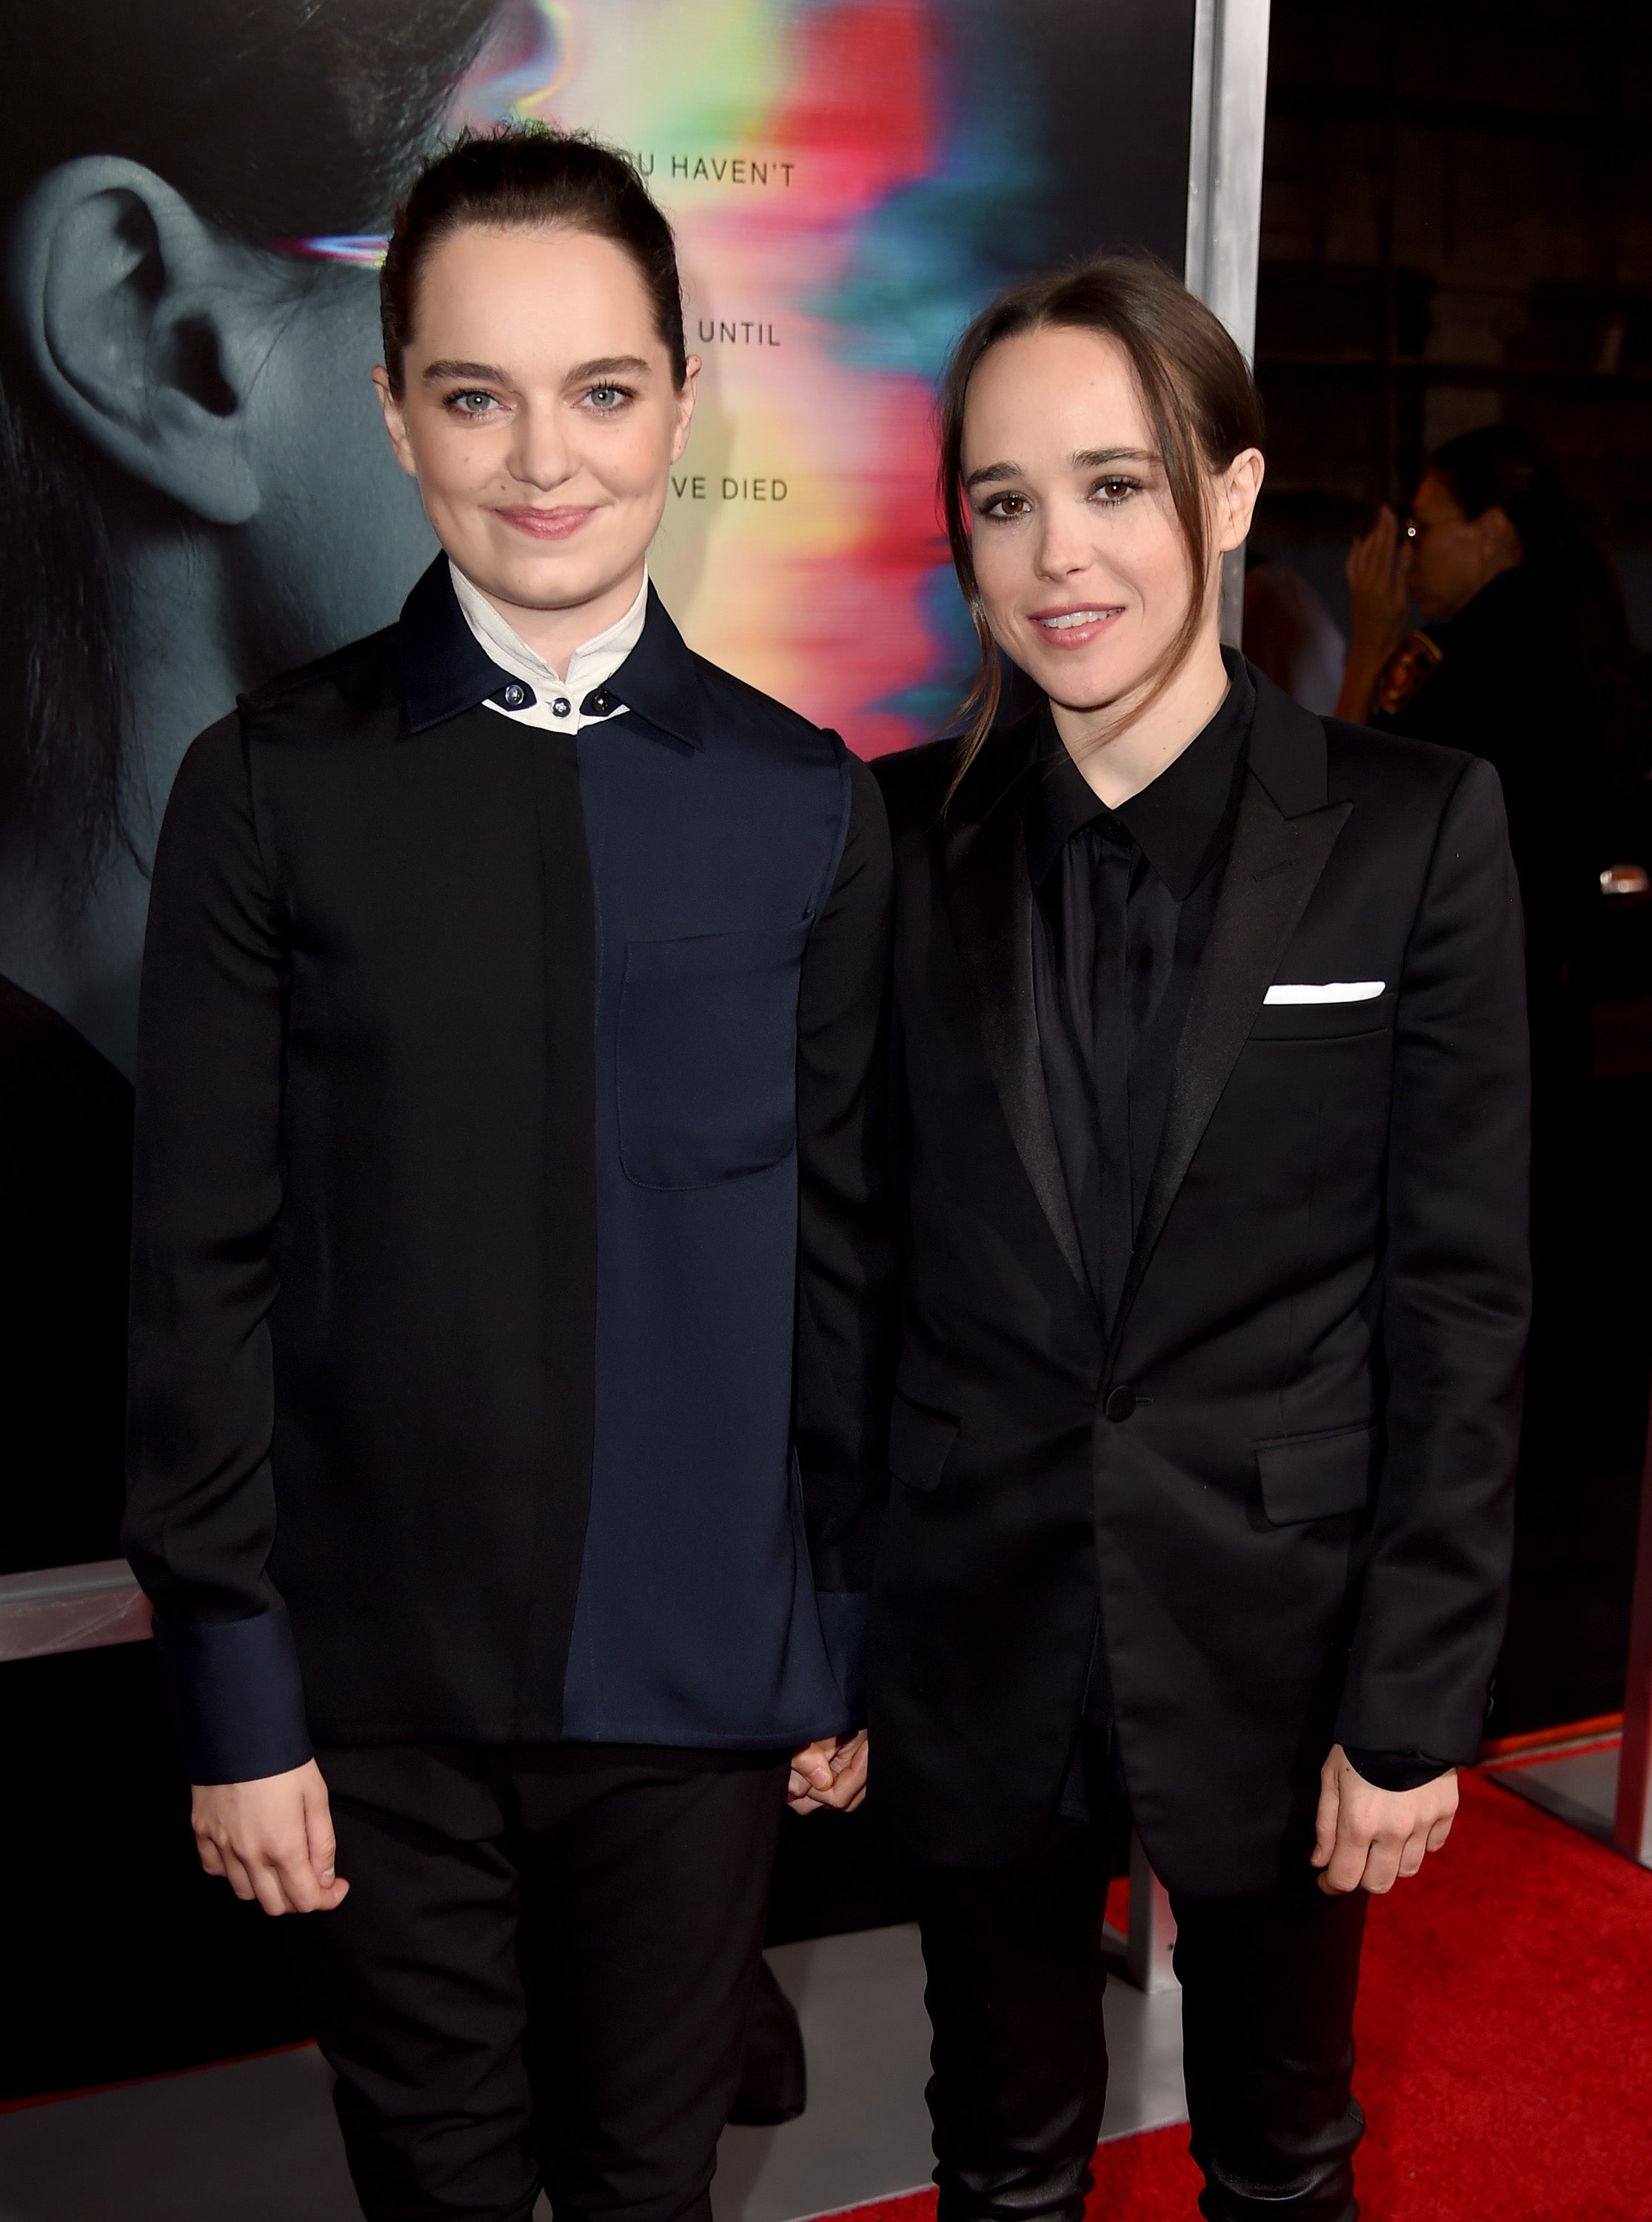 EXCLUSIVE: Ellen Page Says Girlfriend Emma Portner's Support 'Is the